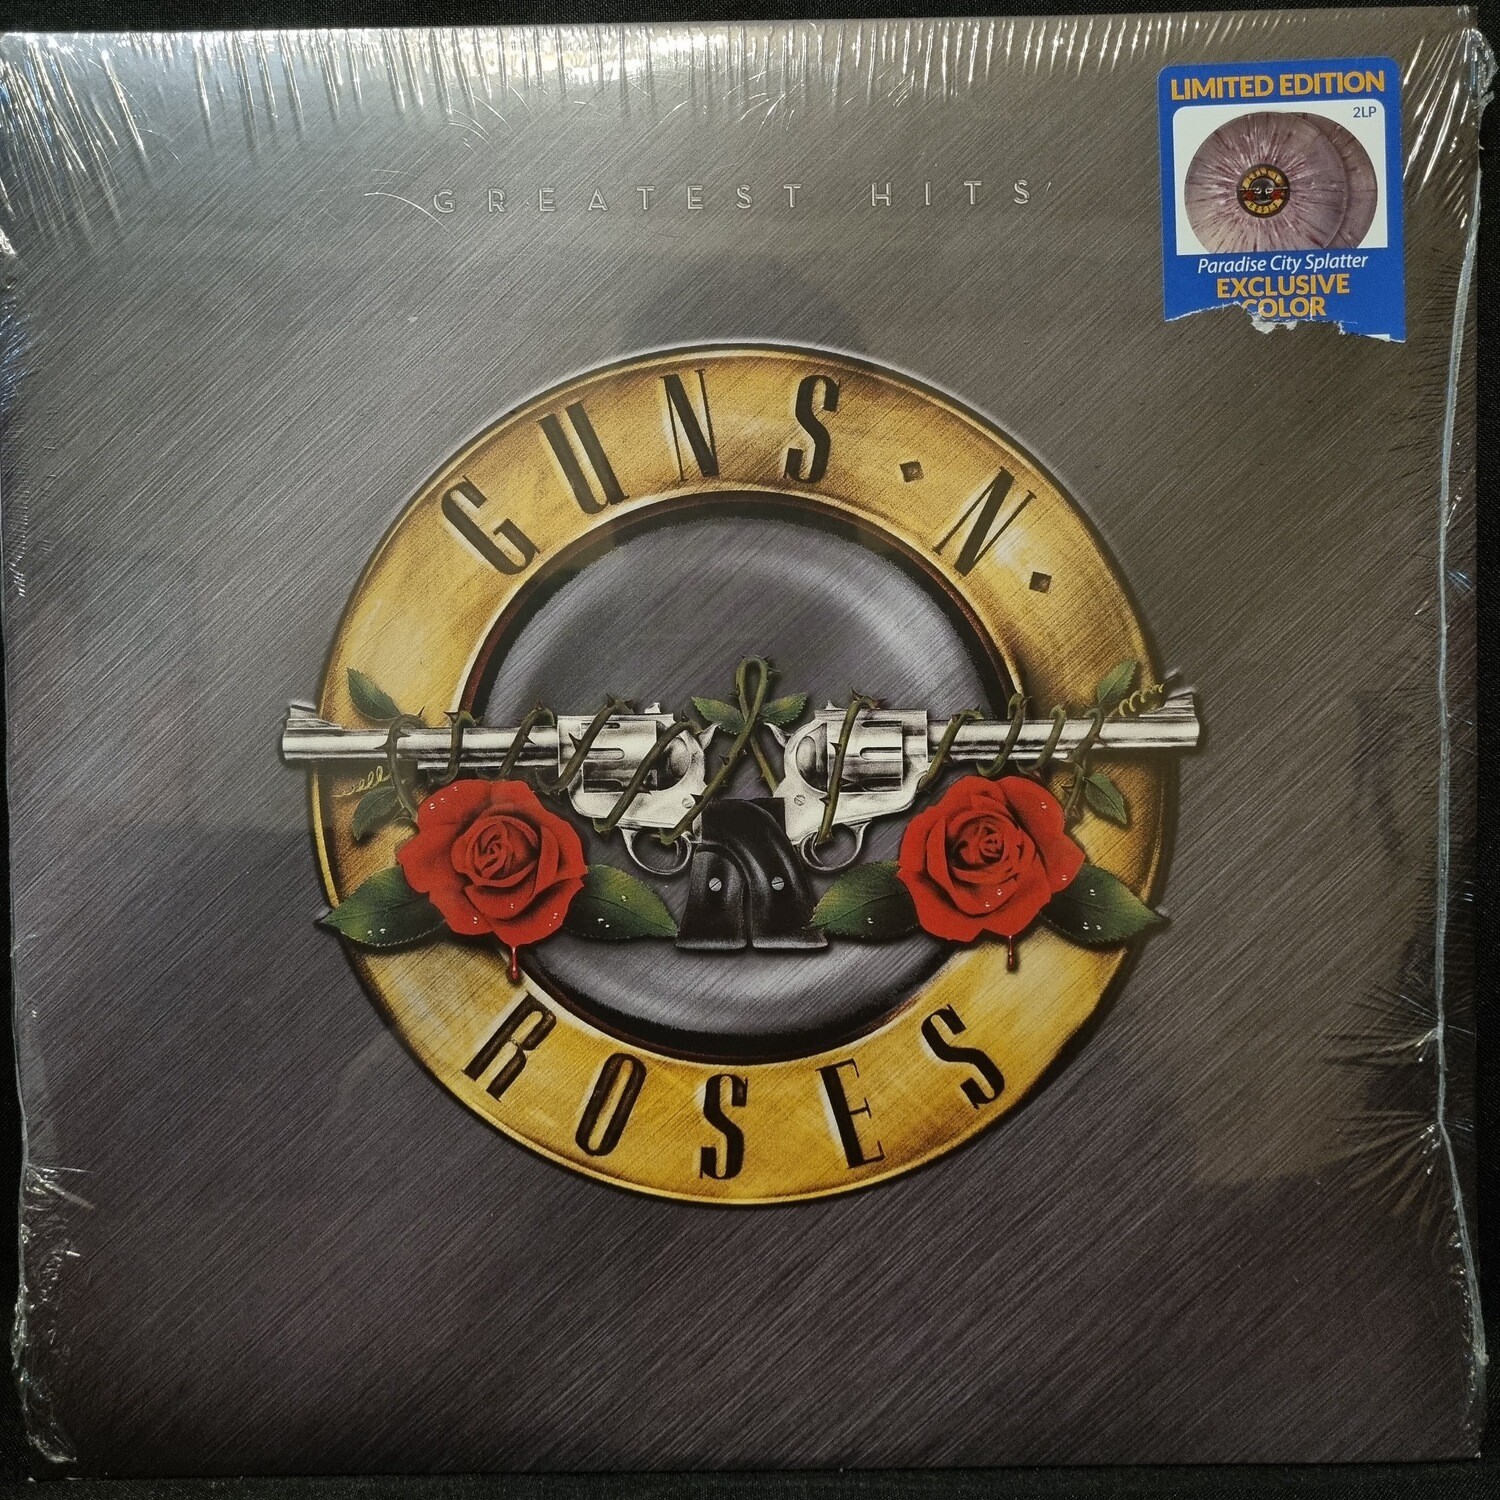 Guns N' Roses- Greatest Hits (Limited edition, colored vinyl)